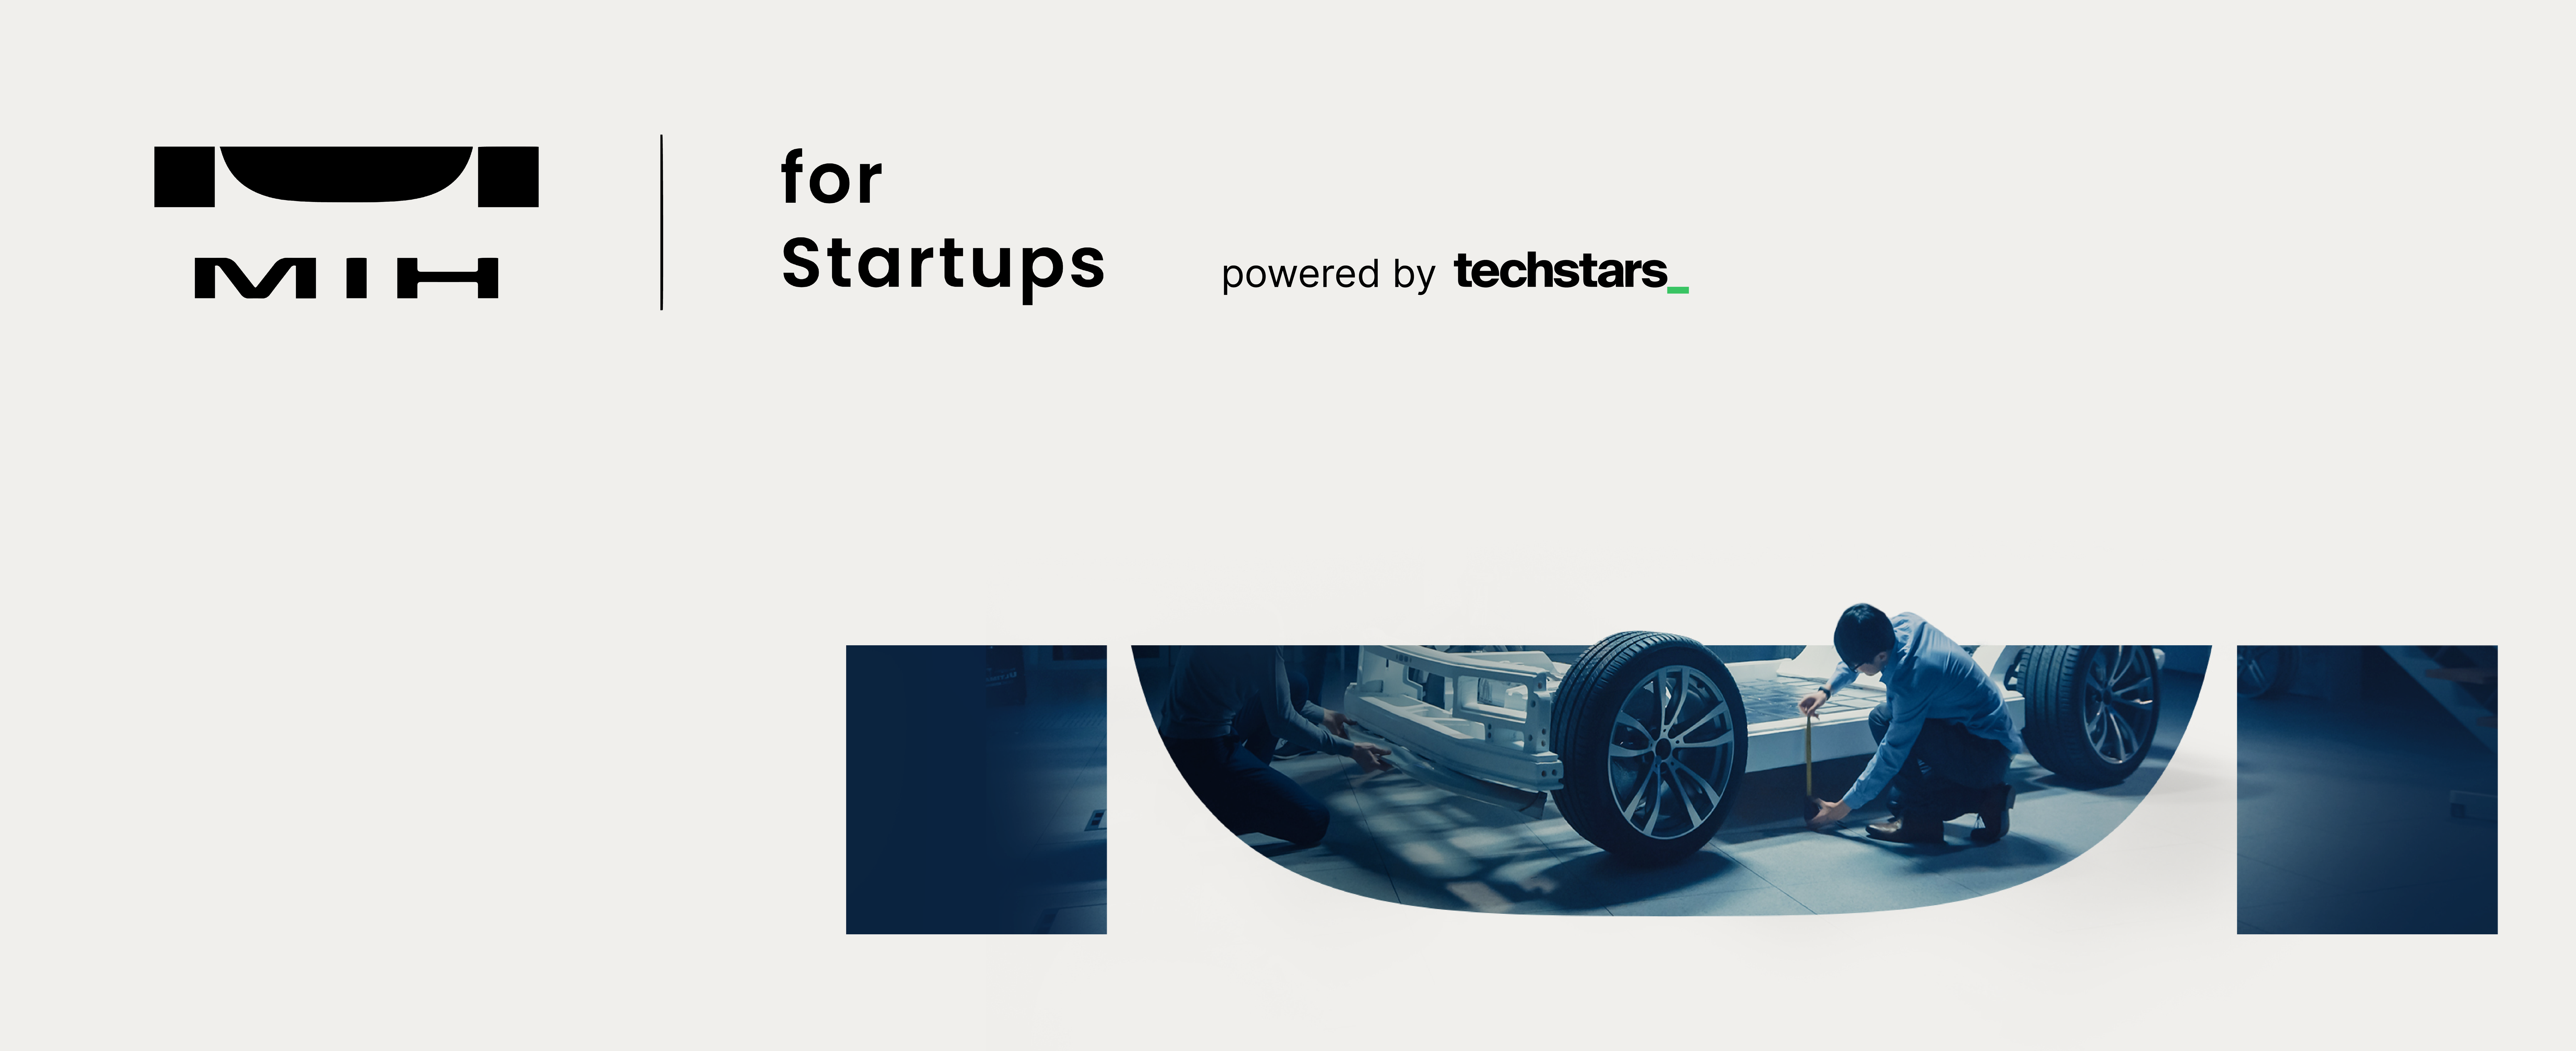 MIH Consortium Partners with Techstars to Drive Innovation on the Next Generation of EV Mobility